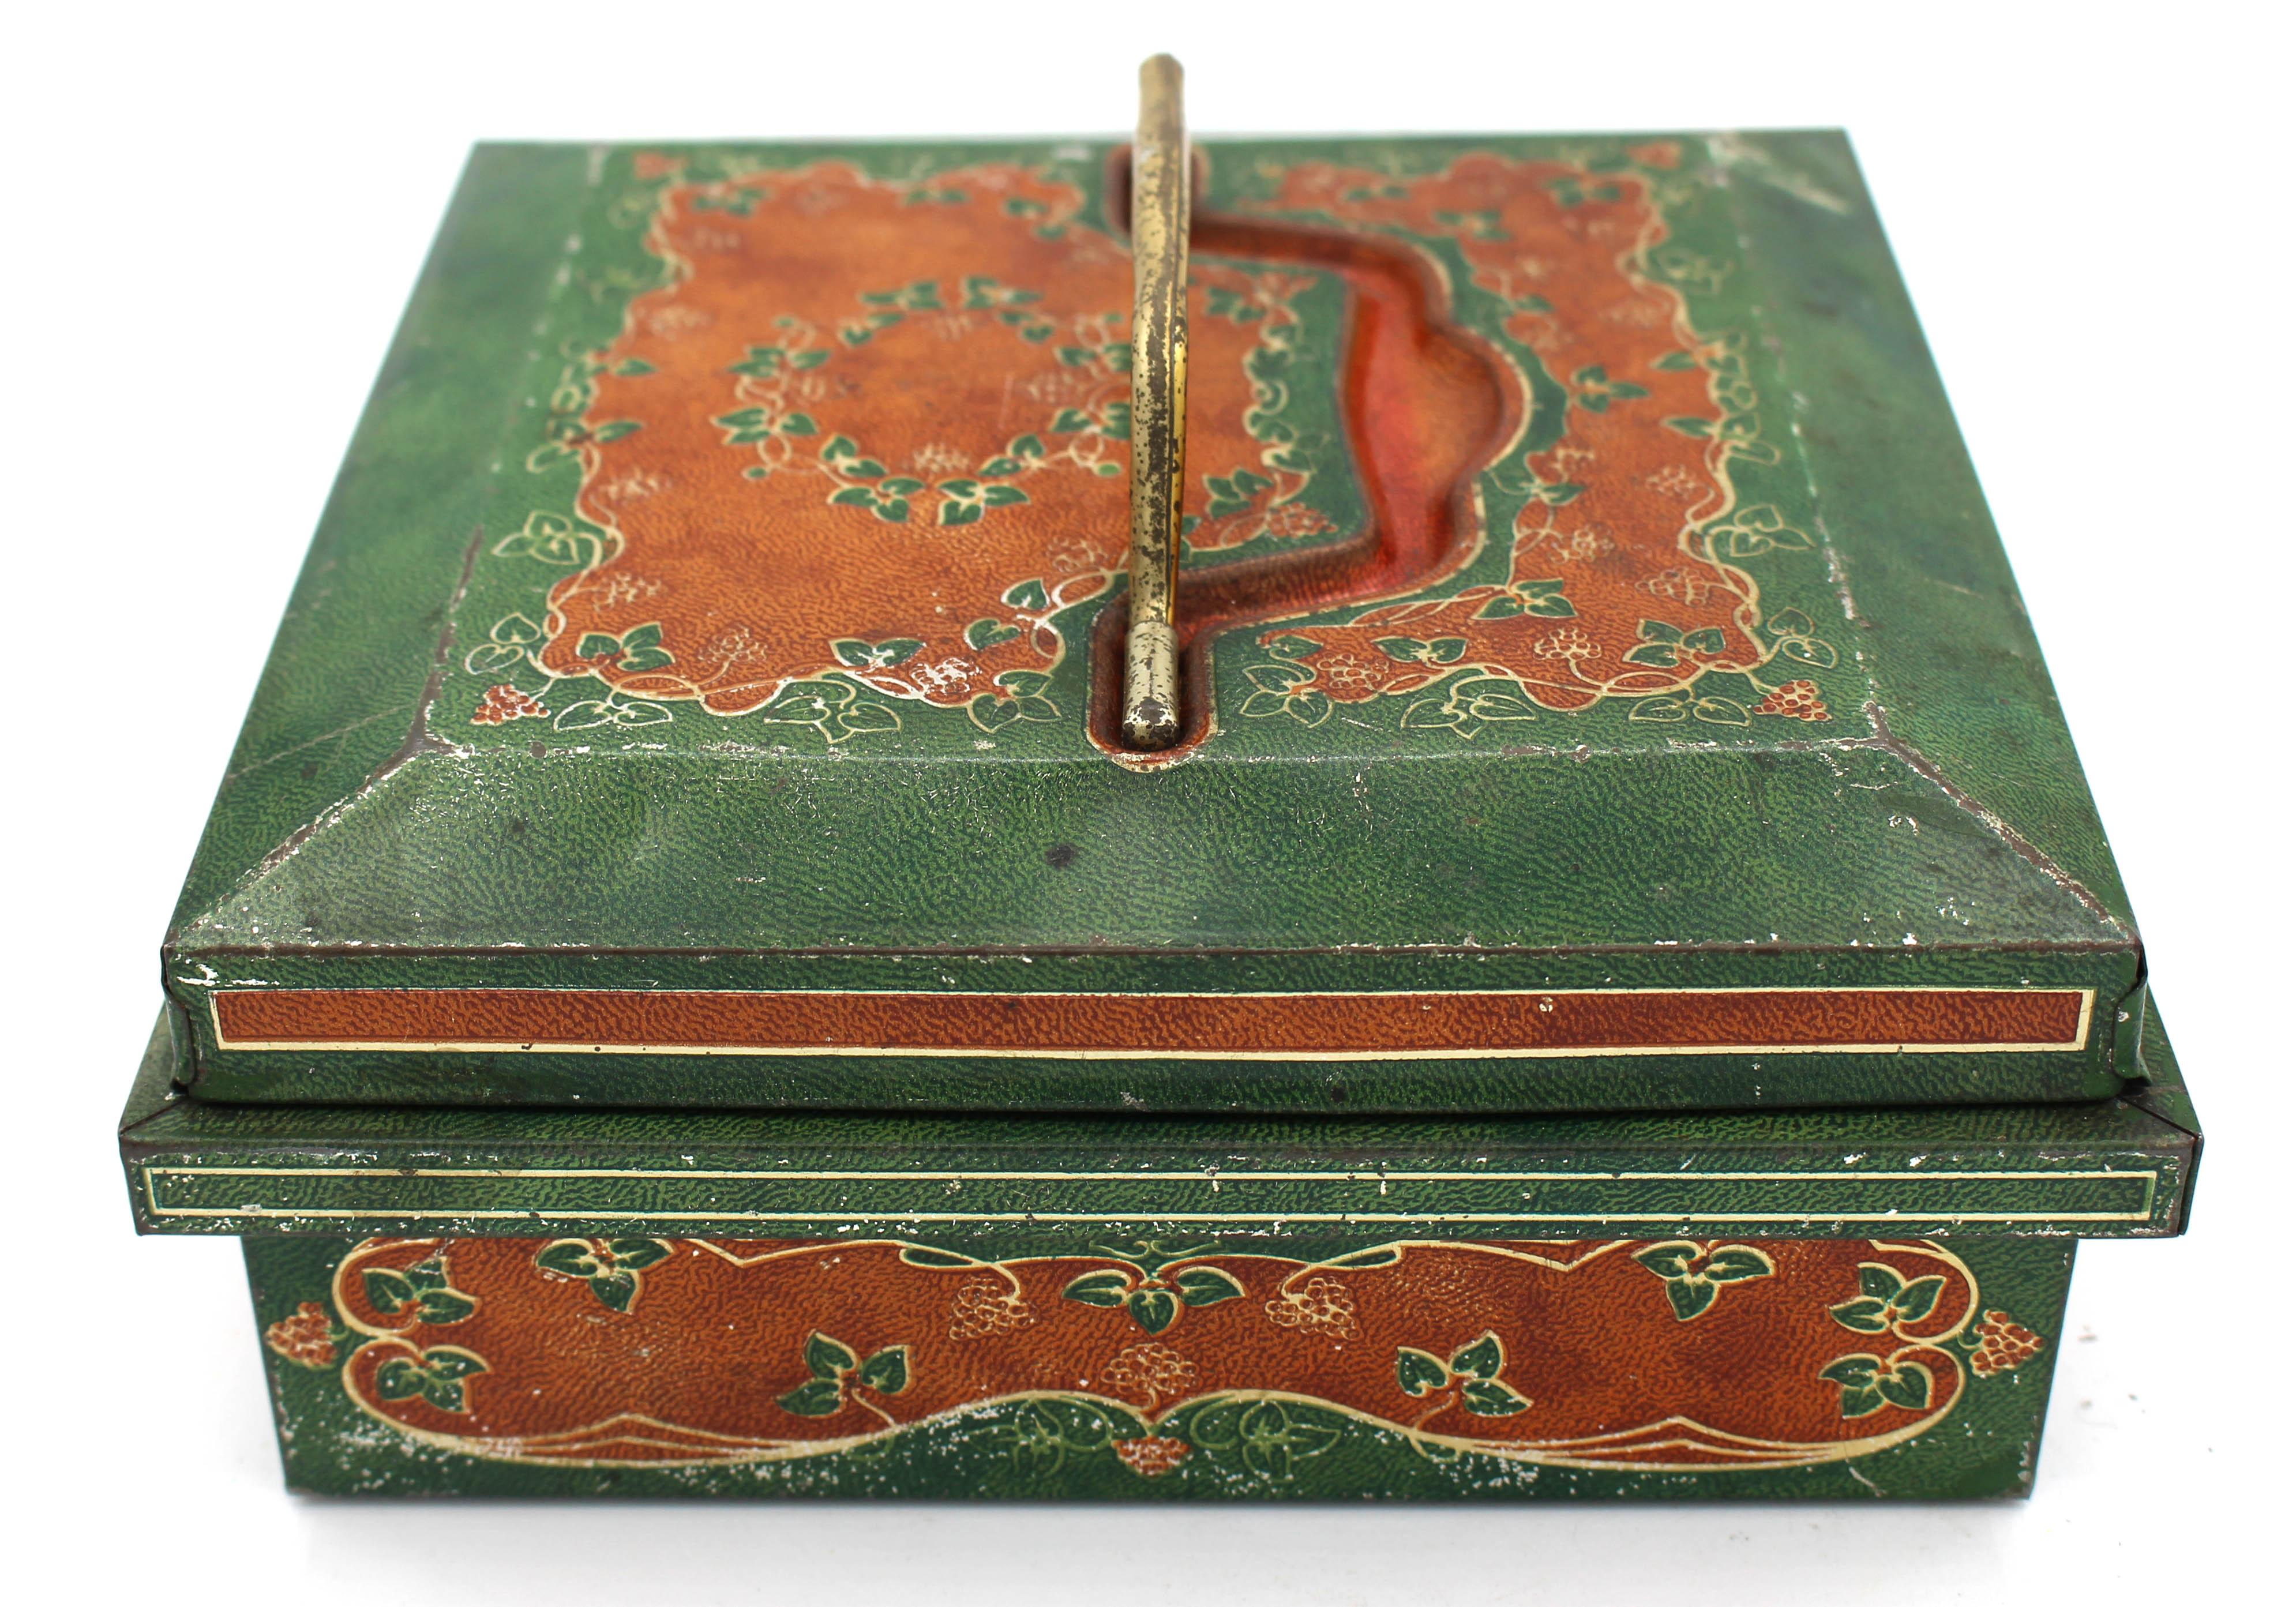 1903 Huntley & Palmers jewelry casket form biscuit tin box. Stylized as a Viennese leather work jewelry box. Recessed handle & fine latch.  Light wear on ridges.
6.5